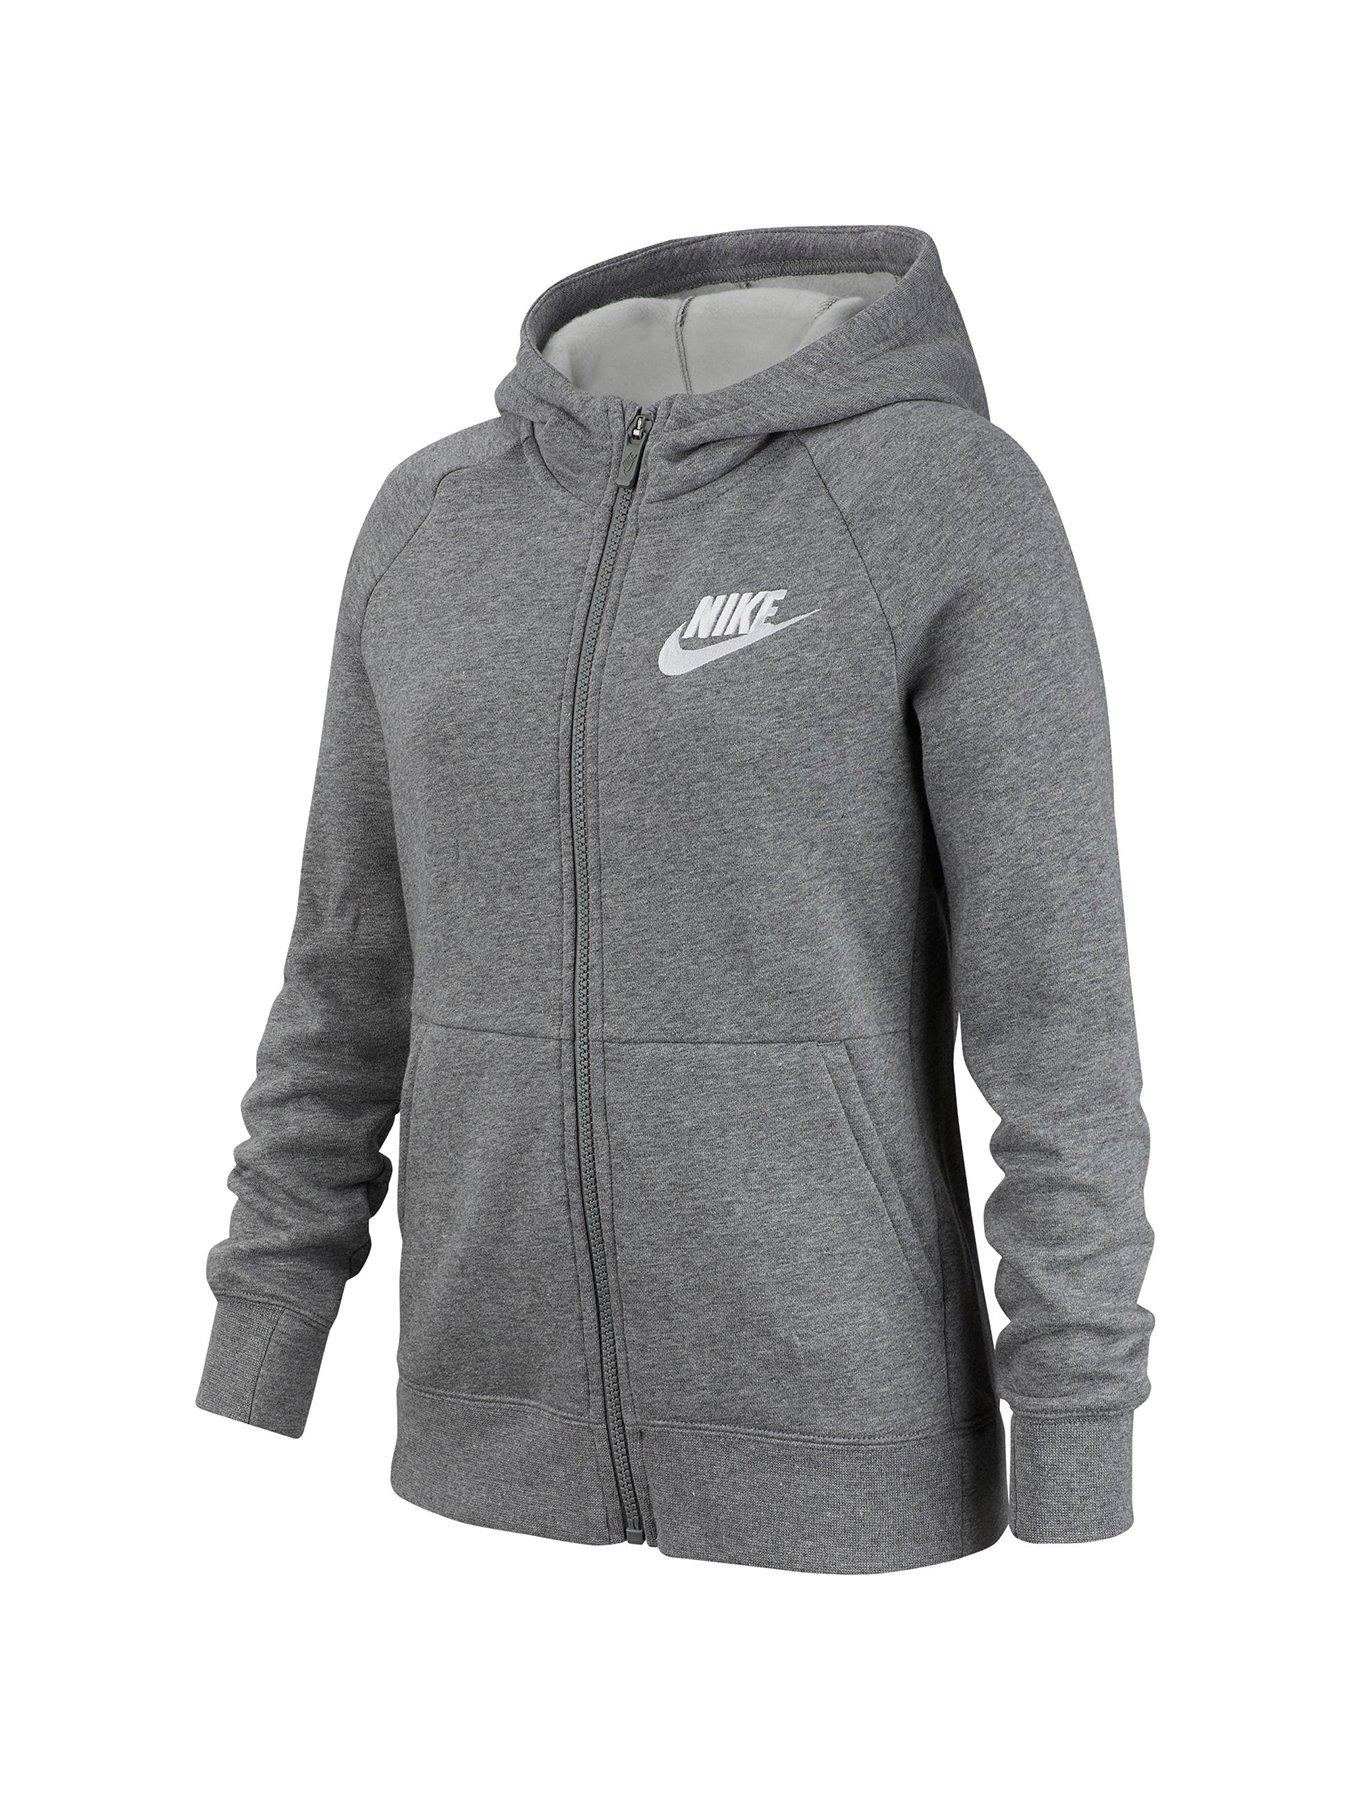 what stores sell nike clothes